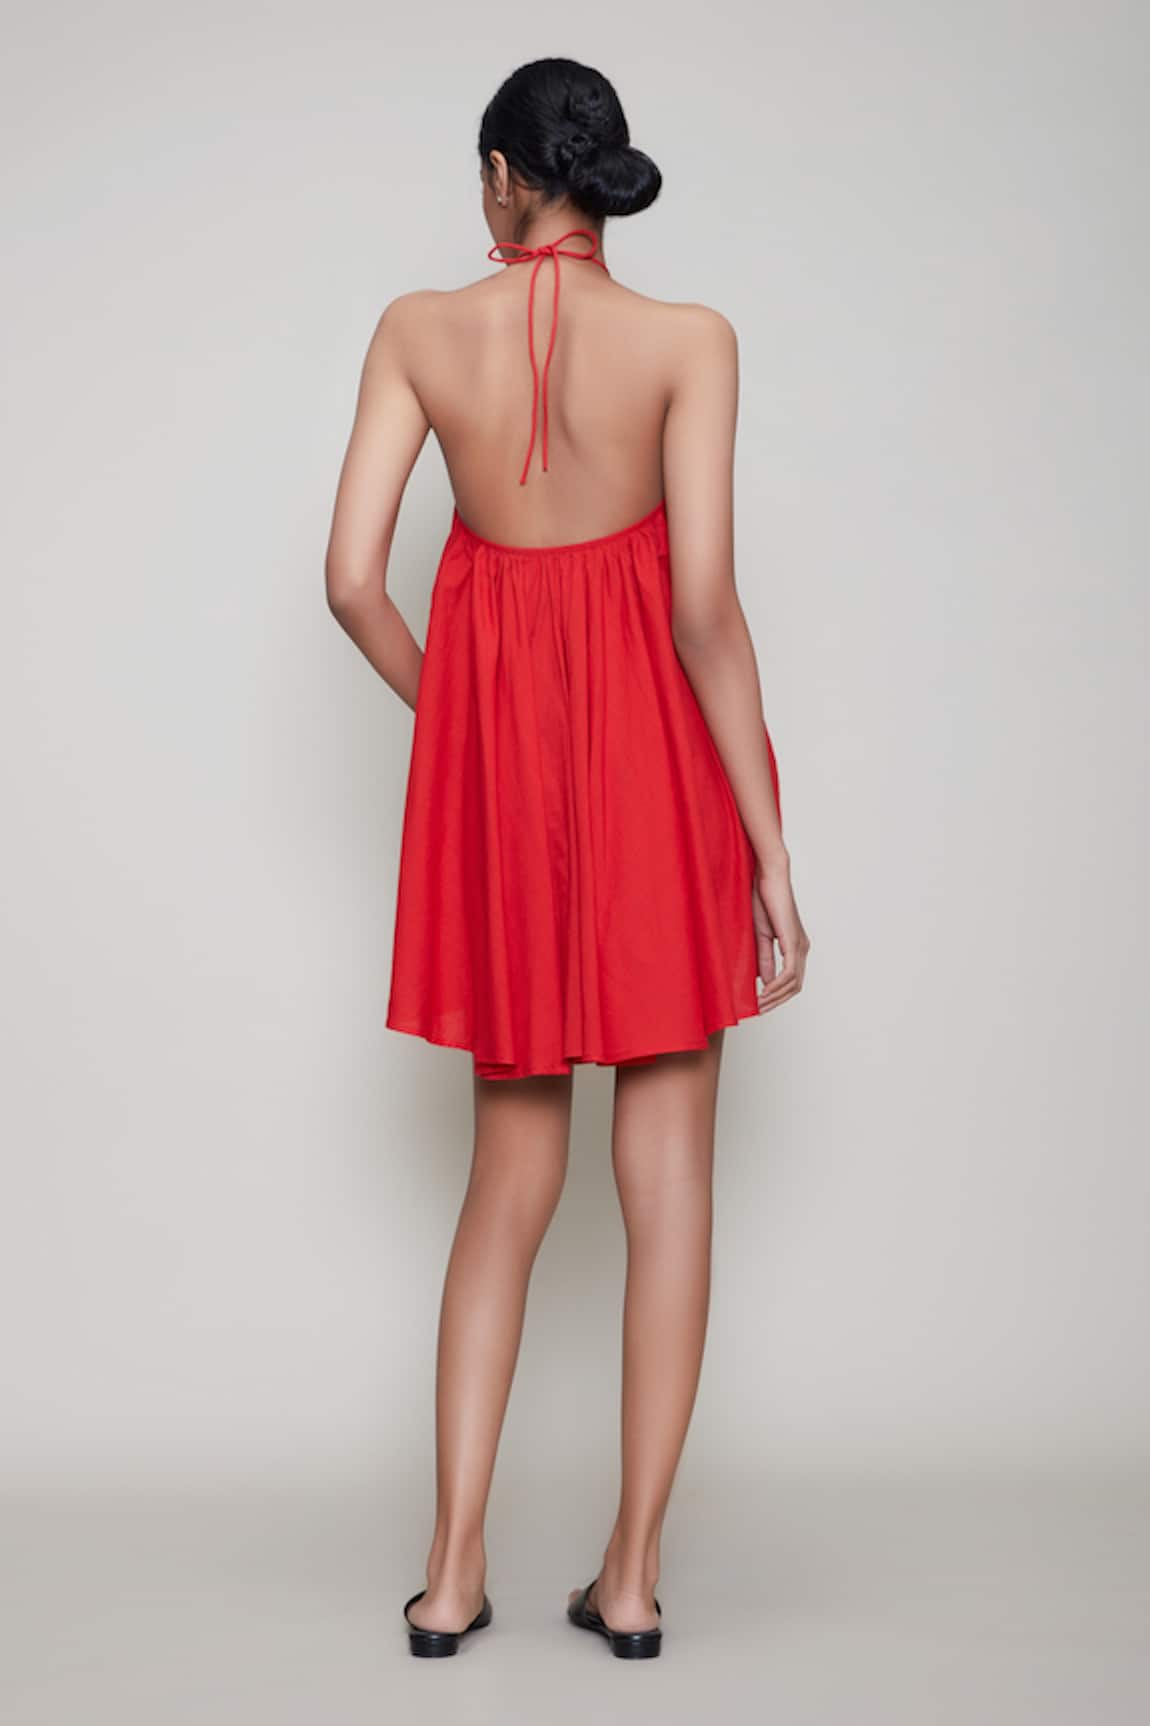 Create dynamic edits, curate your gallery and immerse yourself in inspiring  and motivating content. | Red backless dress, Red prom dress, Dance dresses